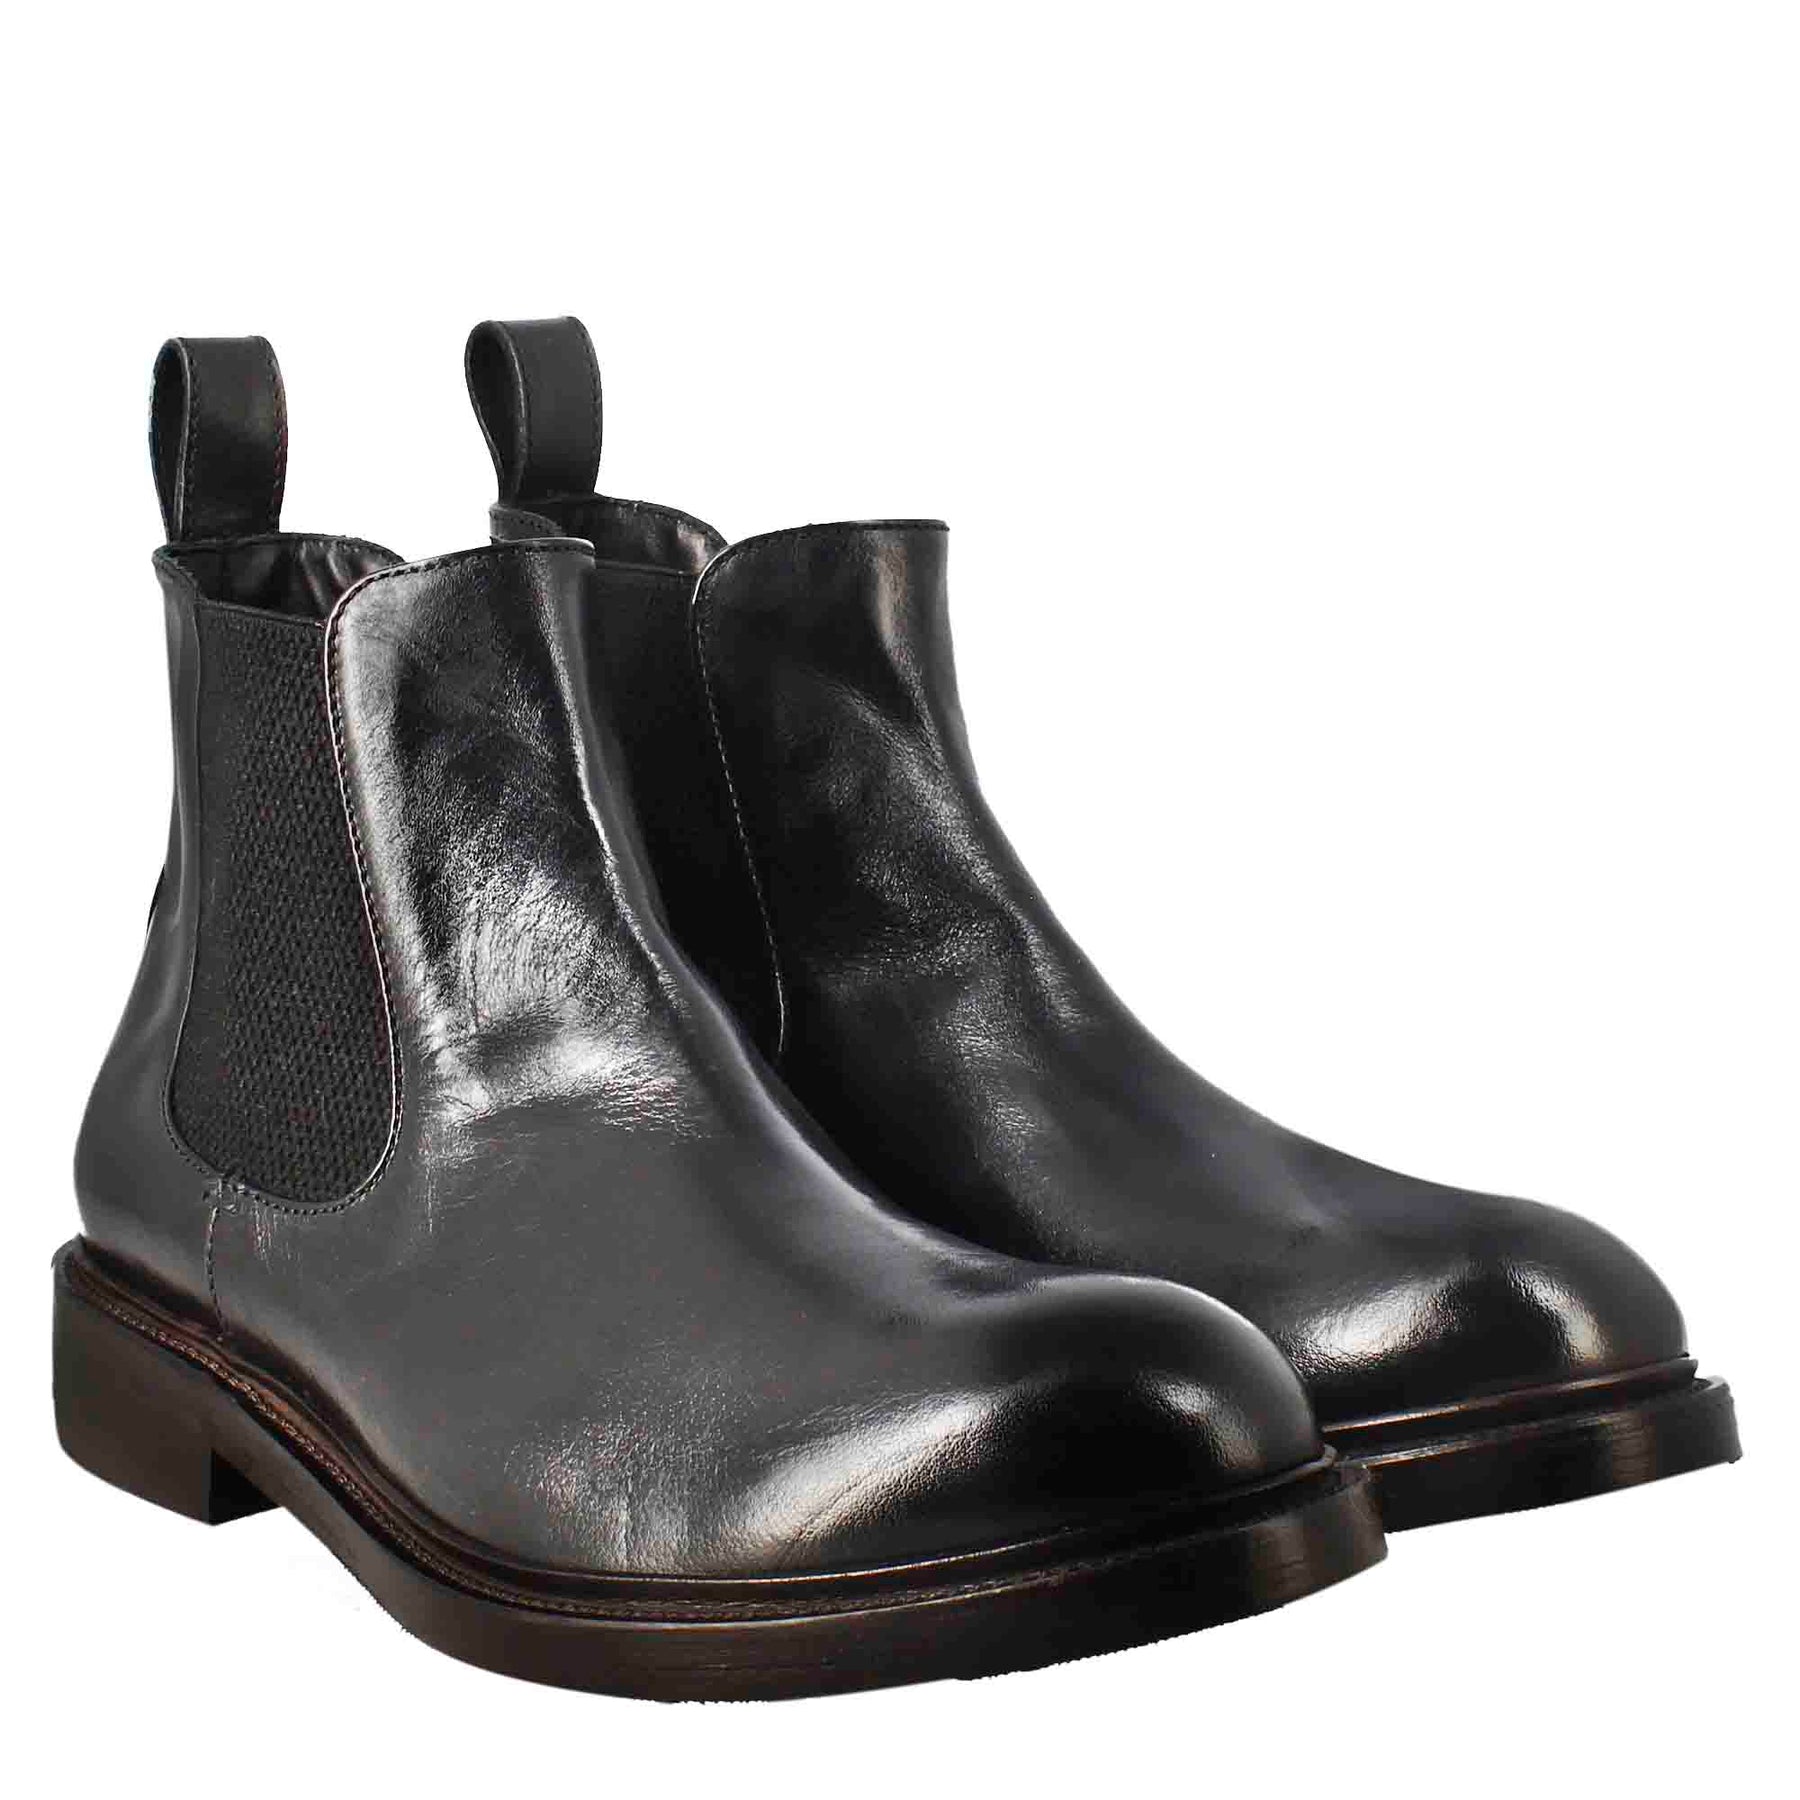 Men's Chelsea Diver boot in black washed leather